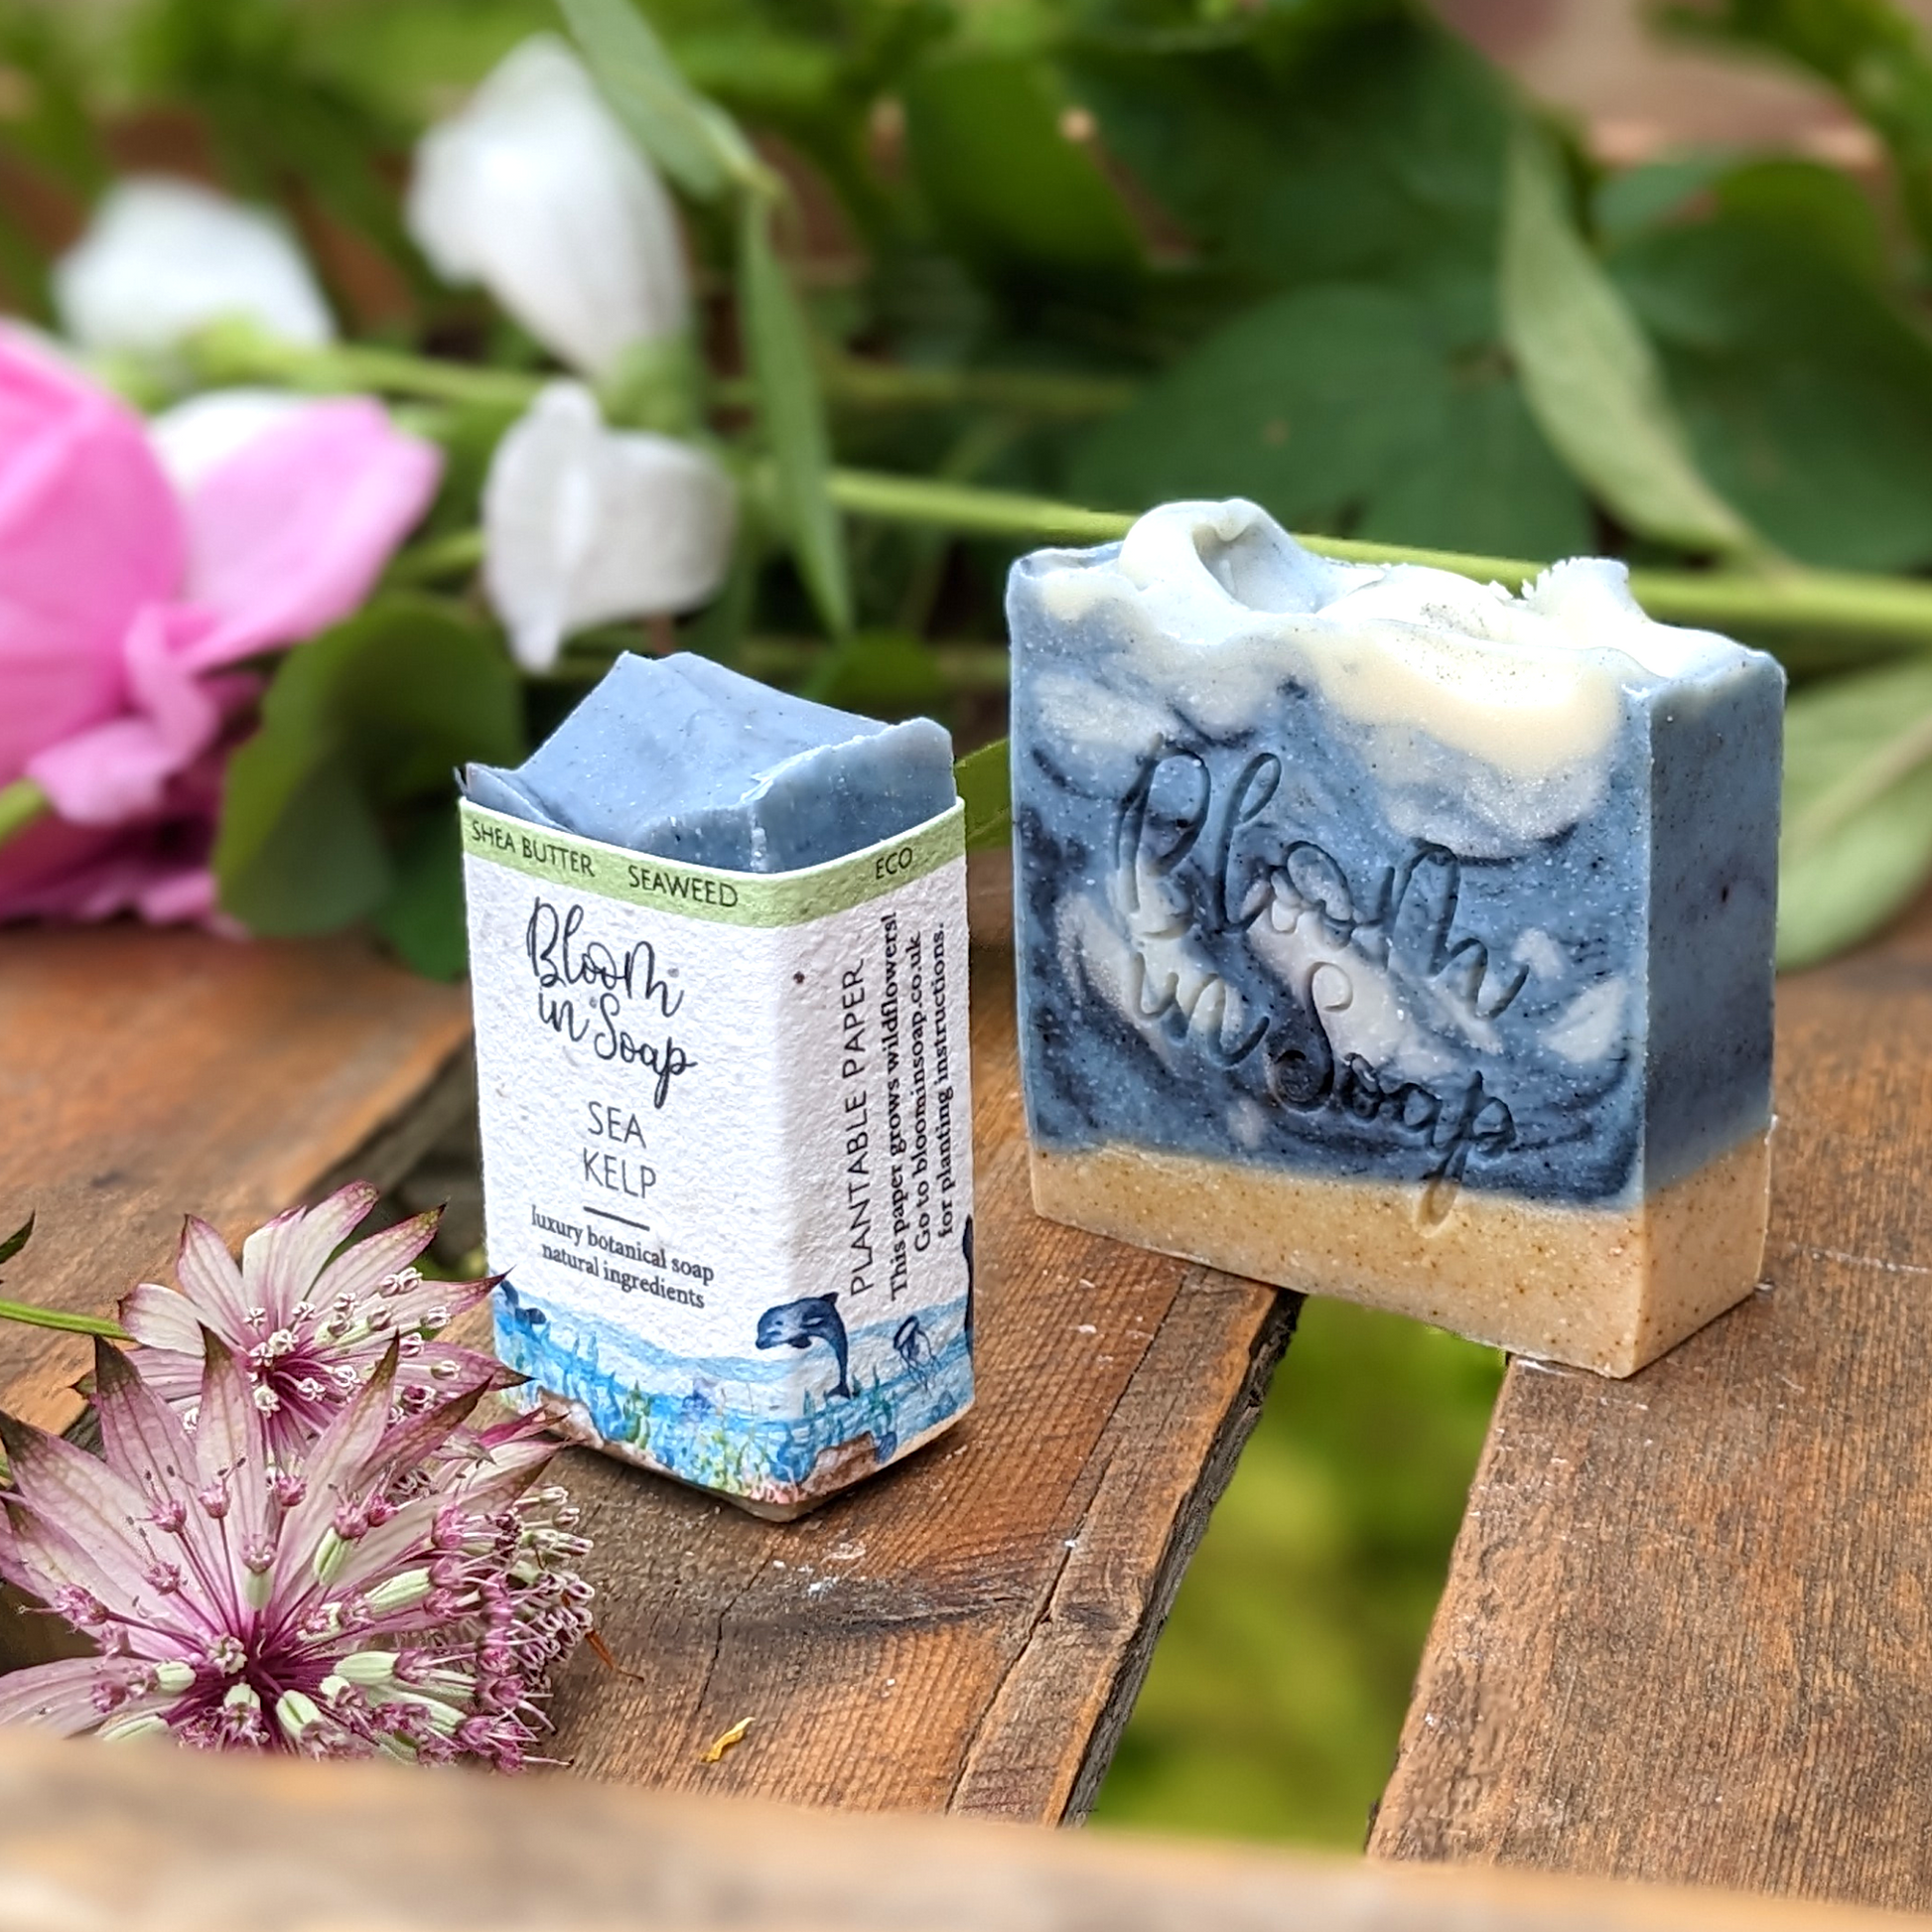 Sea Kelp natural soap from Bloom In Soap